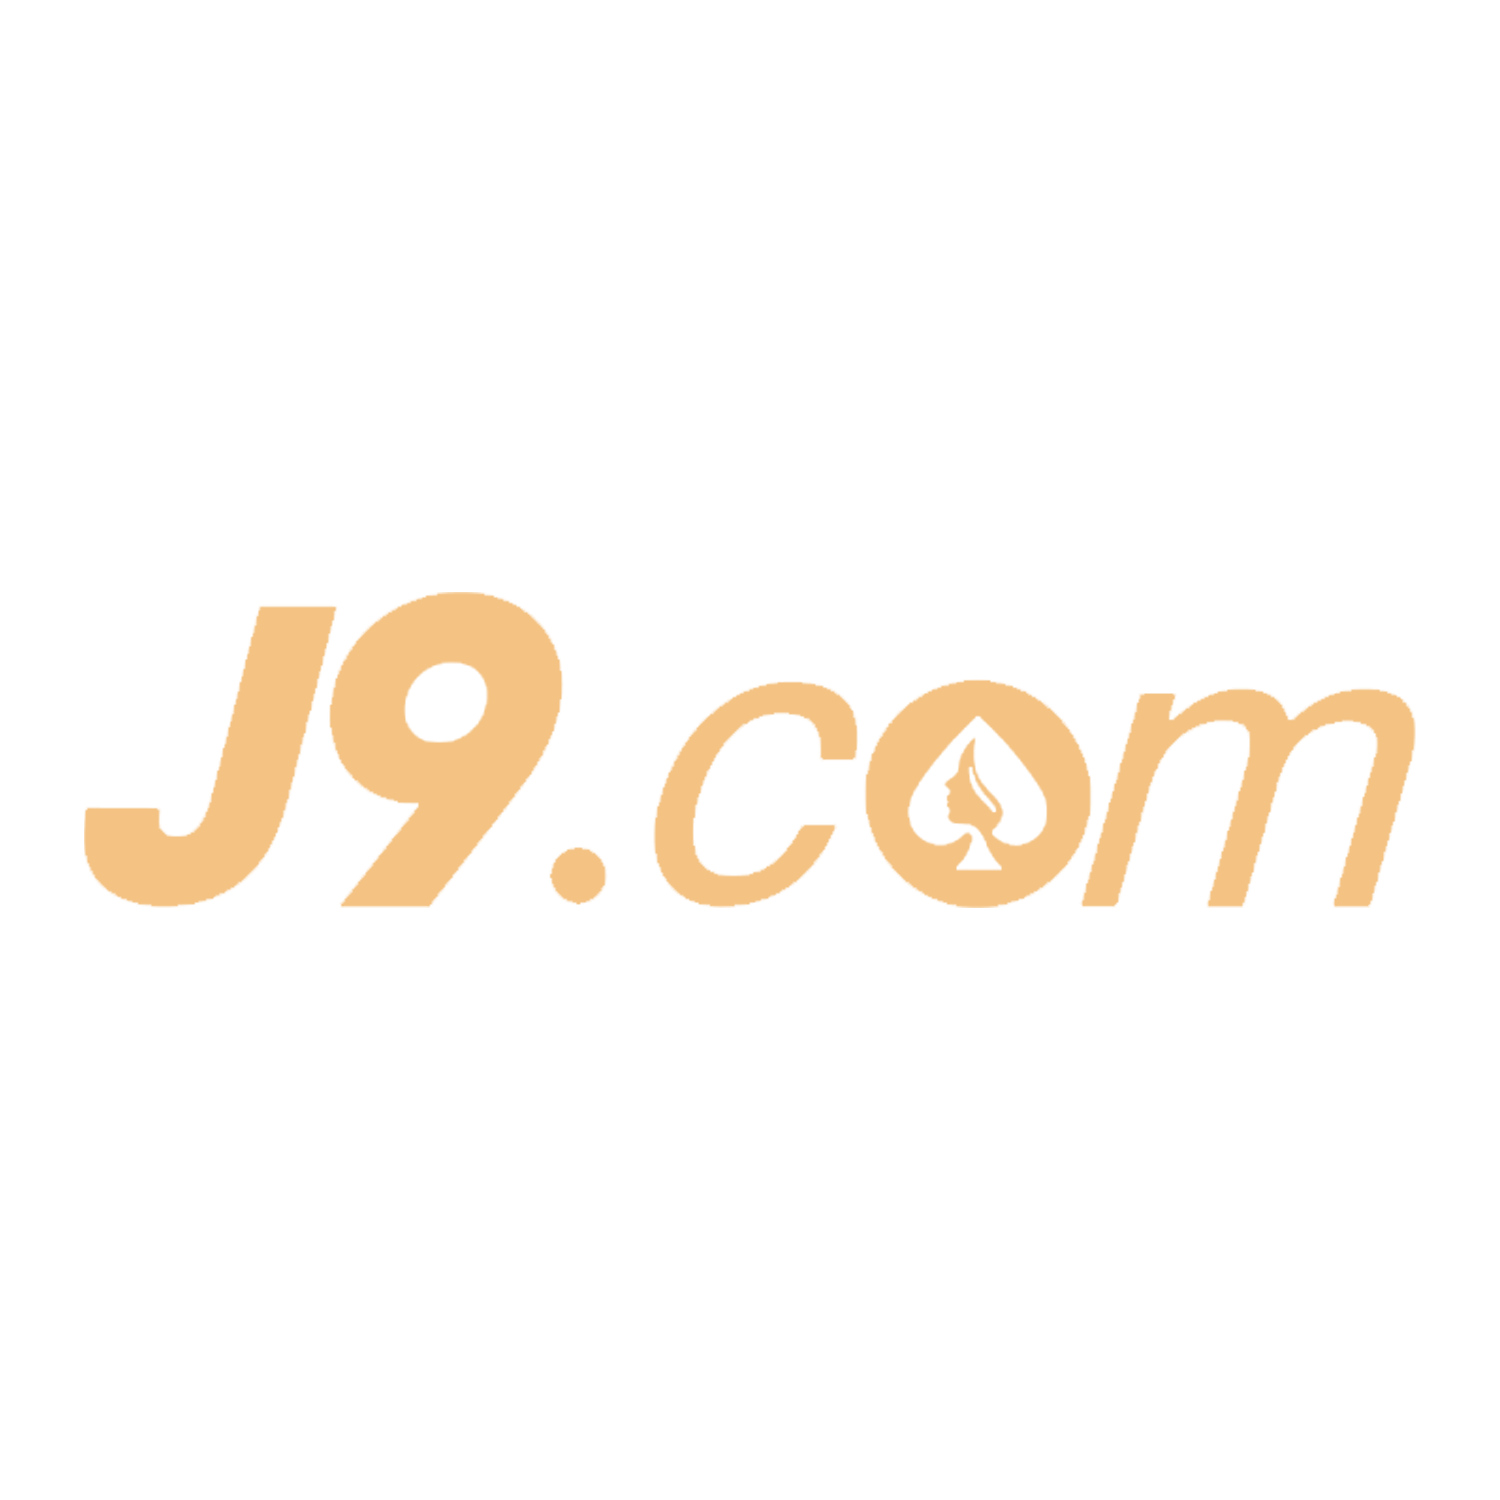 Learn about the features of sports and esports betting at J9.com.